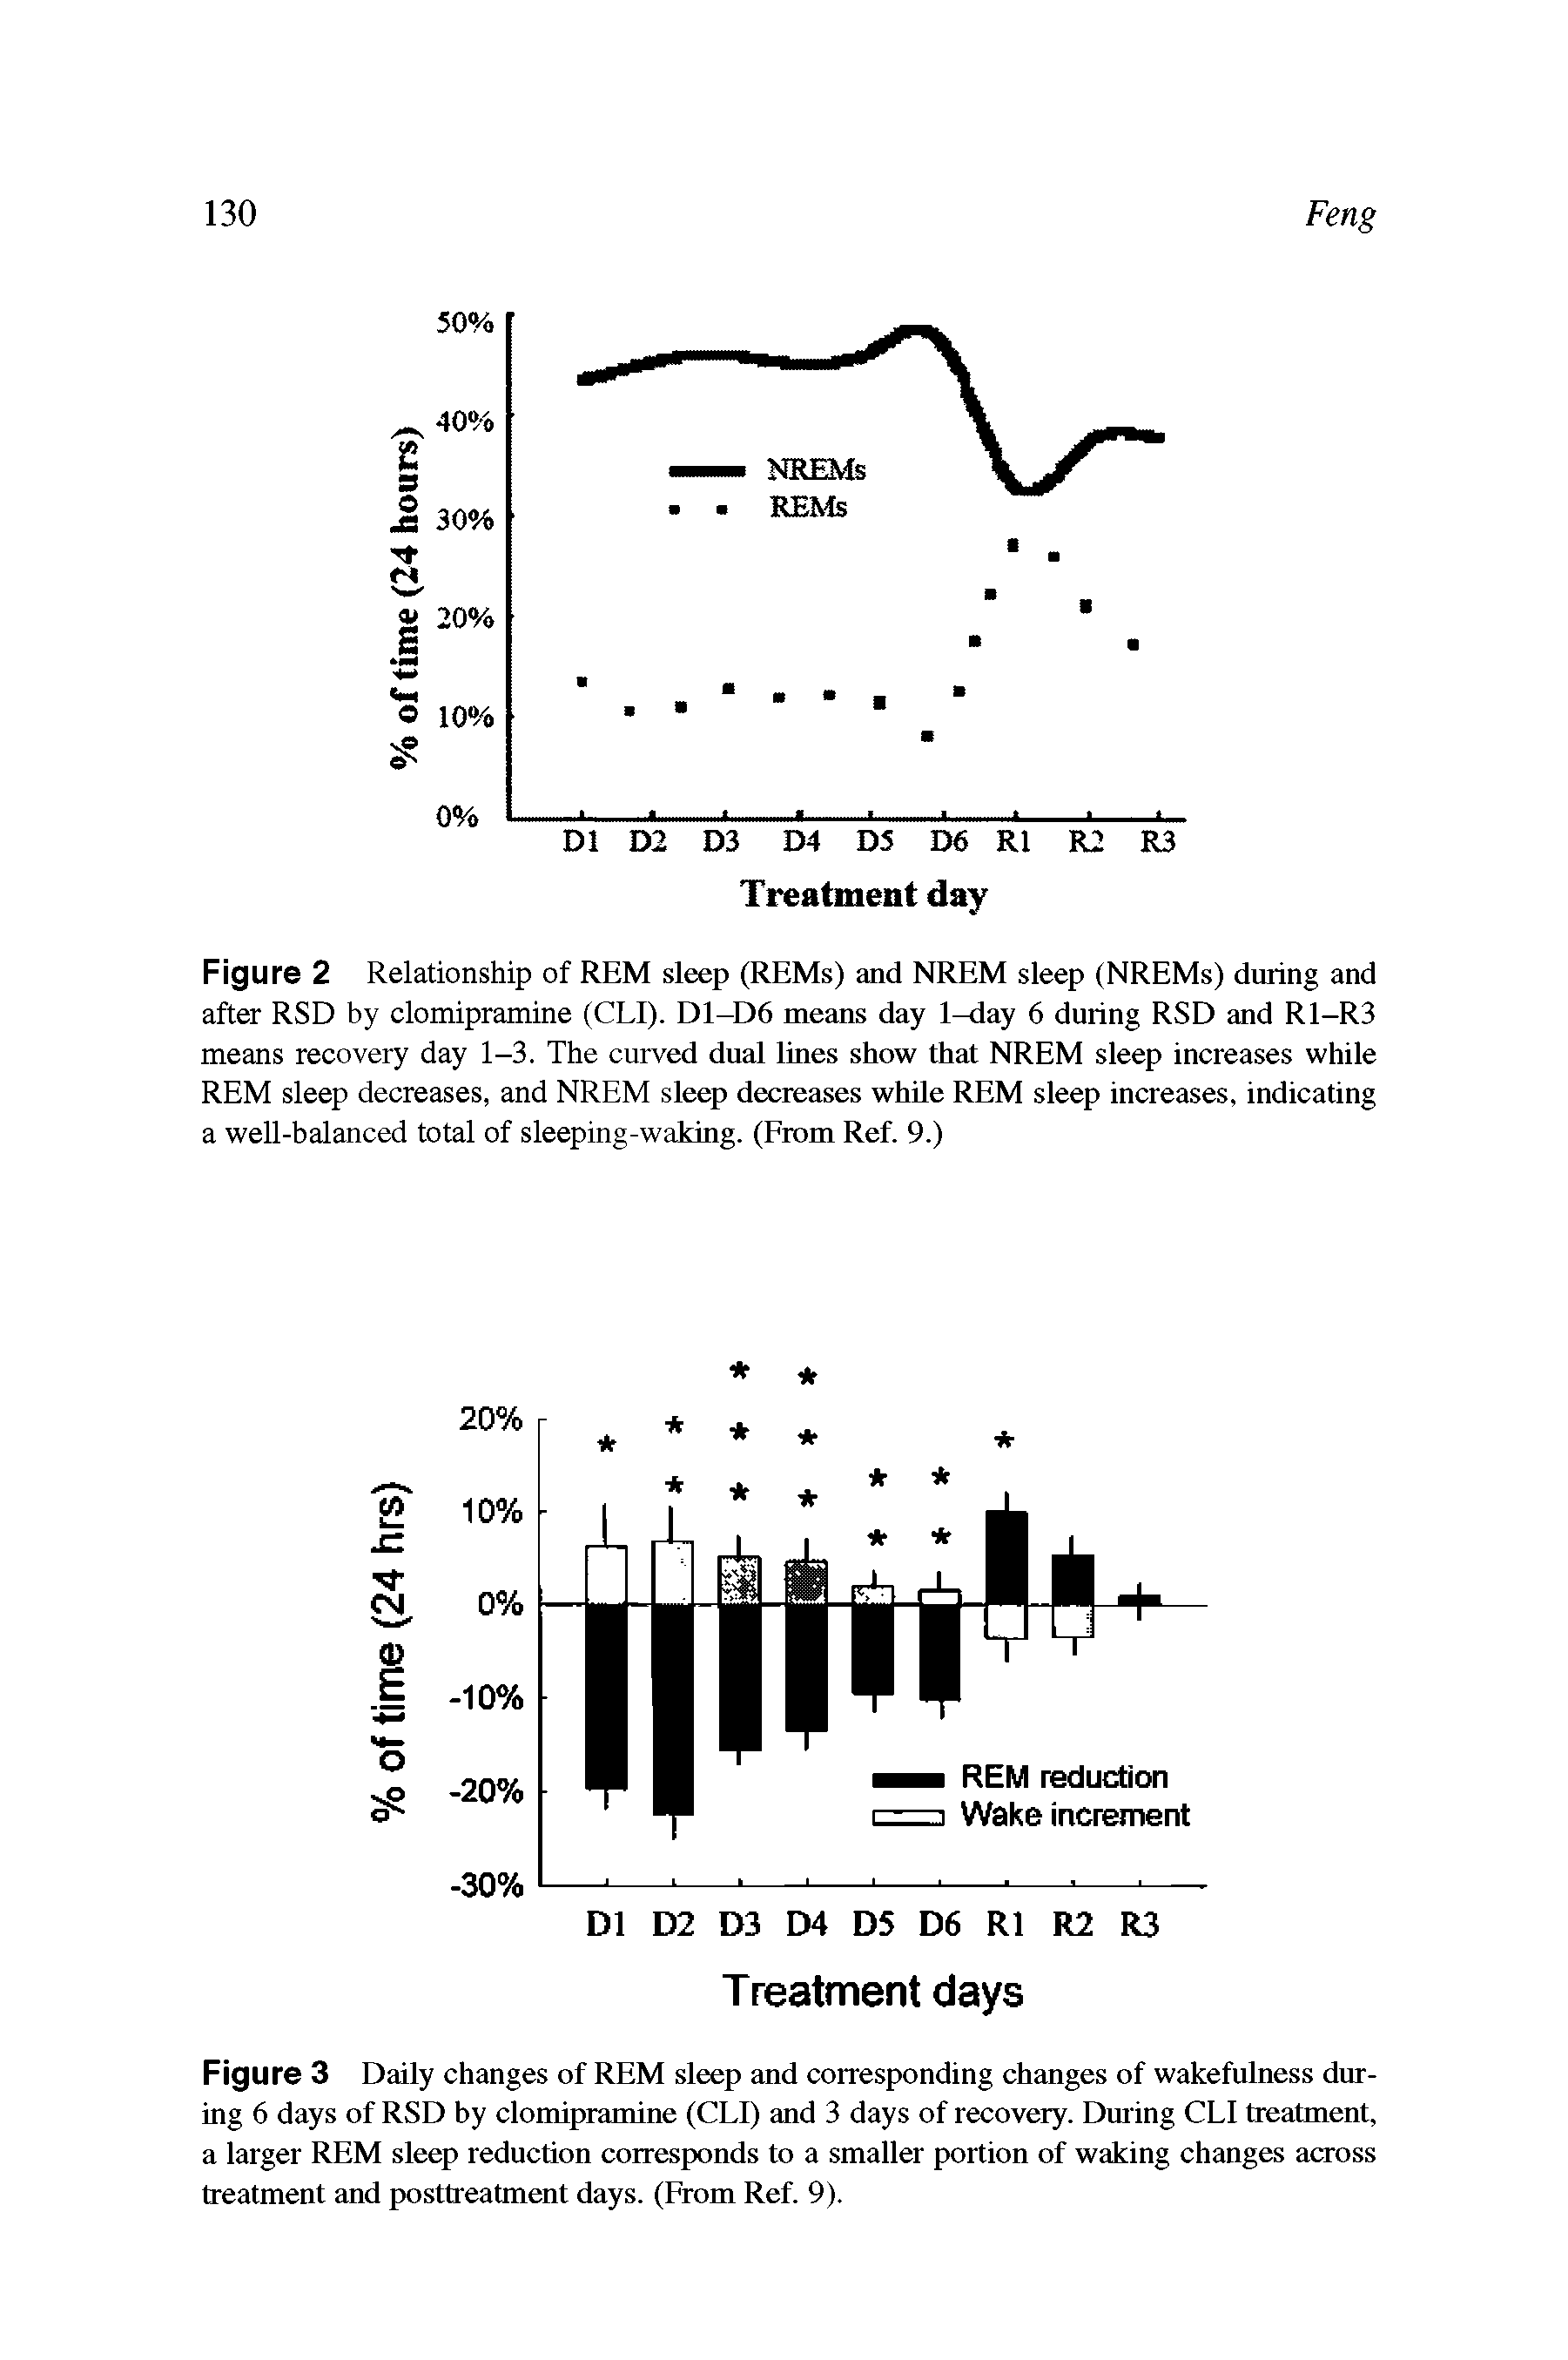 Figure 3 Daily changes of REM sleep and corresponding changes of wakefulness during 6 days of RSD by clomipramine (CLI) and 3 days of recovery. During CLI treatment, a larger REM sleep reduction corresponds to a smaller portion of waking changes across treatment and posttreatment days. (From Ref. 9).